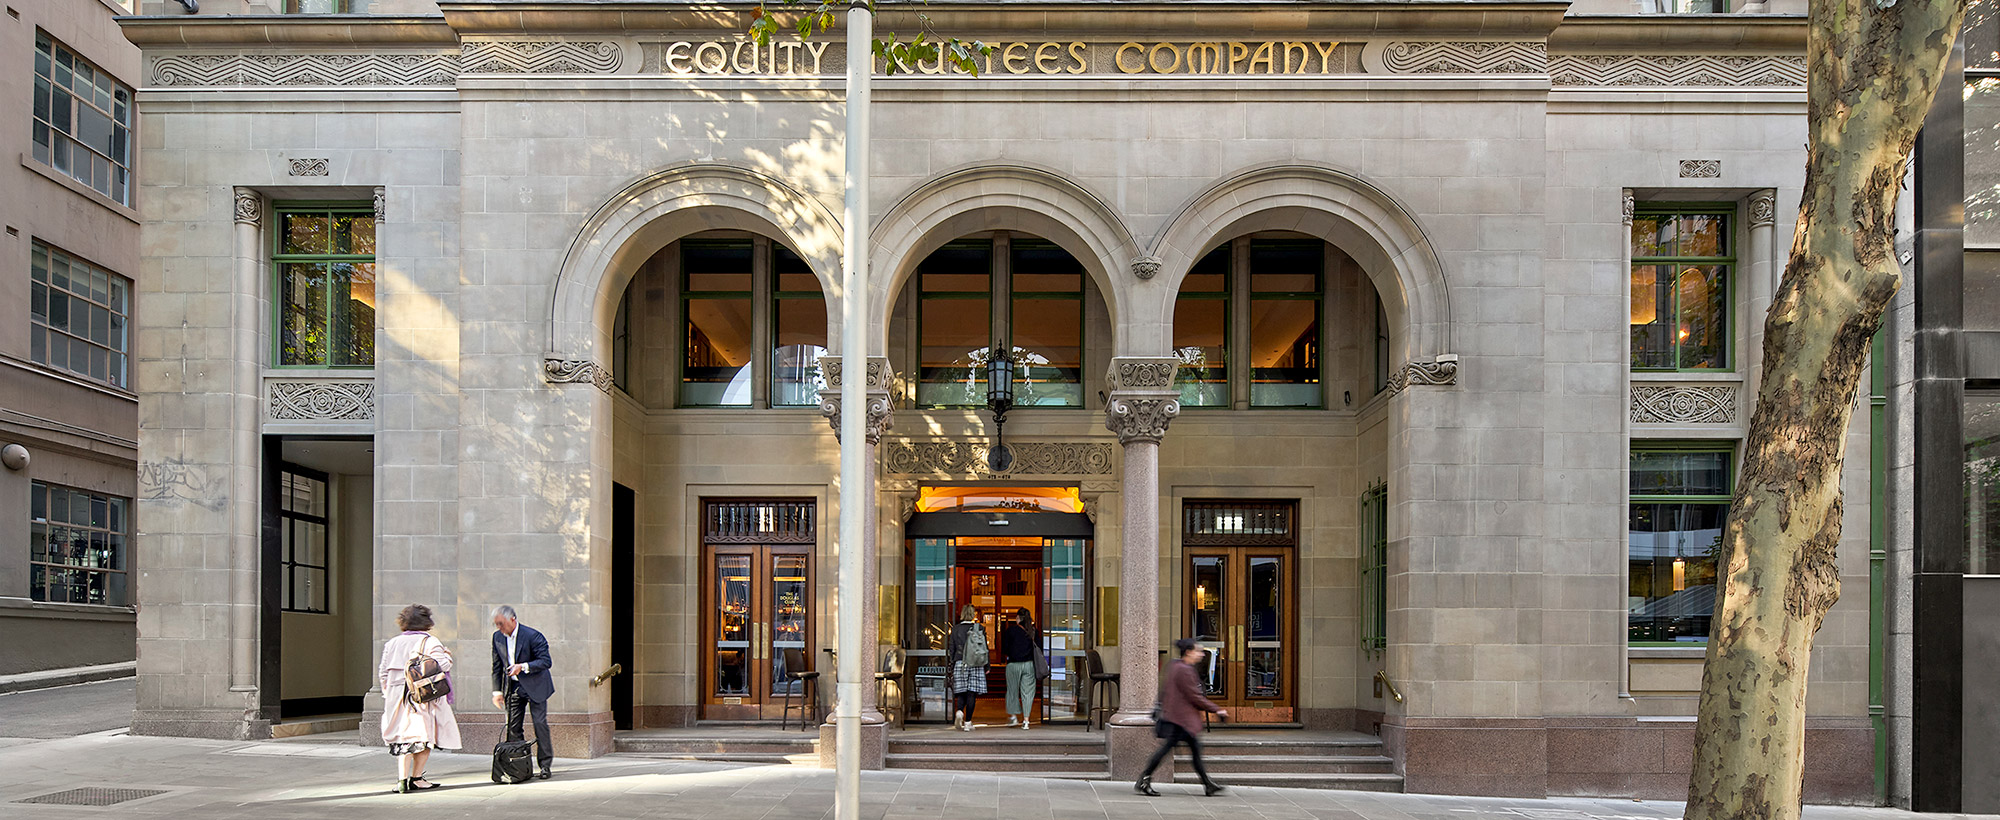 Equity Chambers, Melbourne